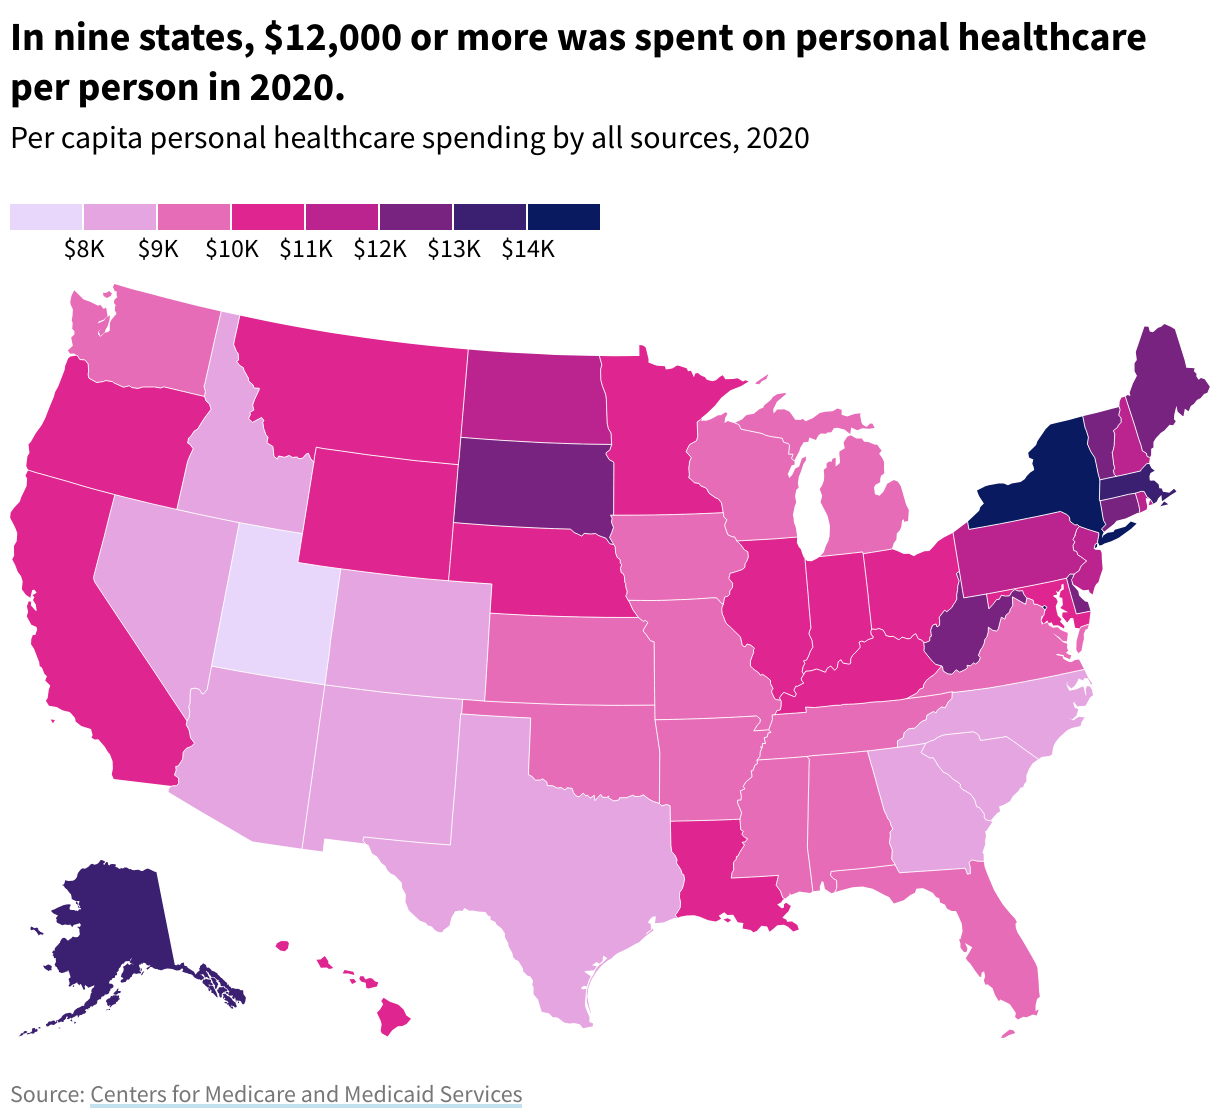 US map showing per capita personal healthcare spending by all sources. In nine states, $12,000 or more was spent on personal healthcare per person in 2020.